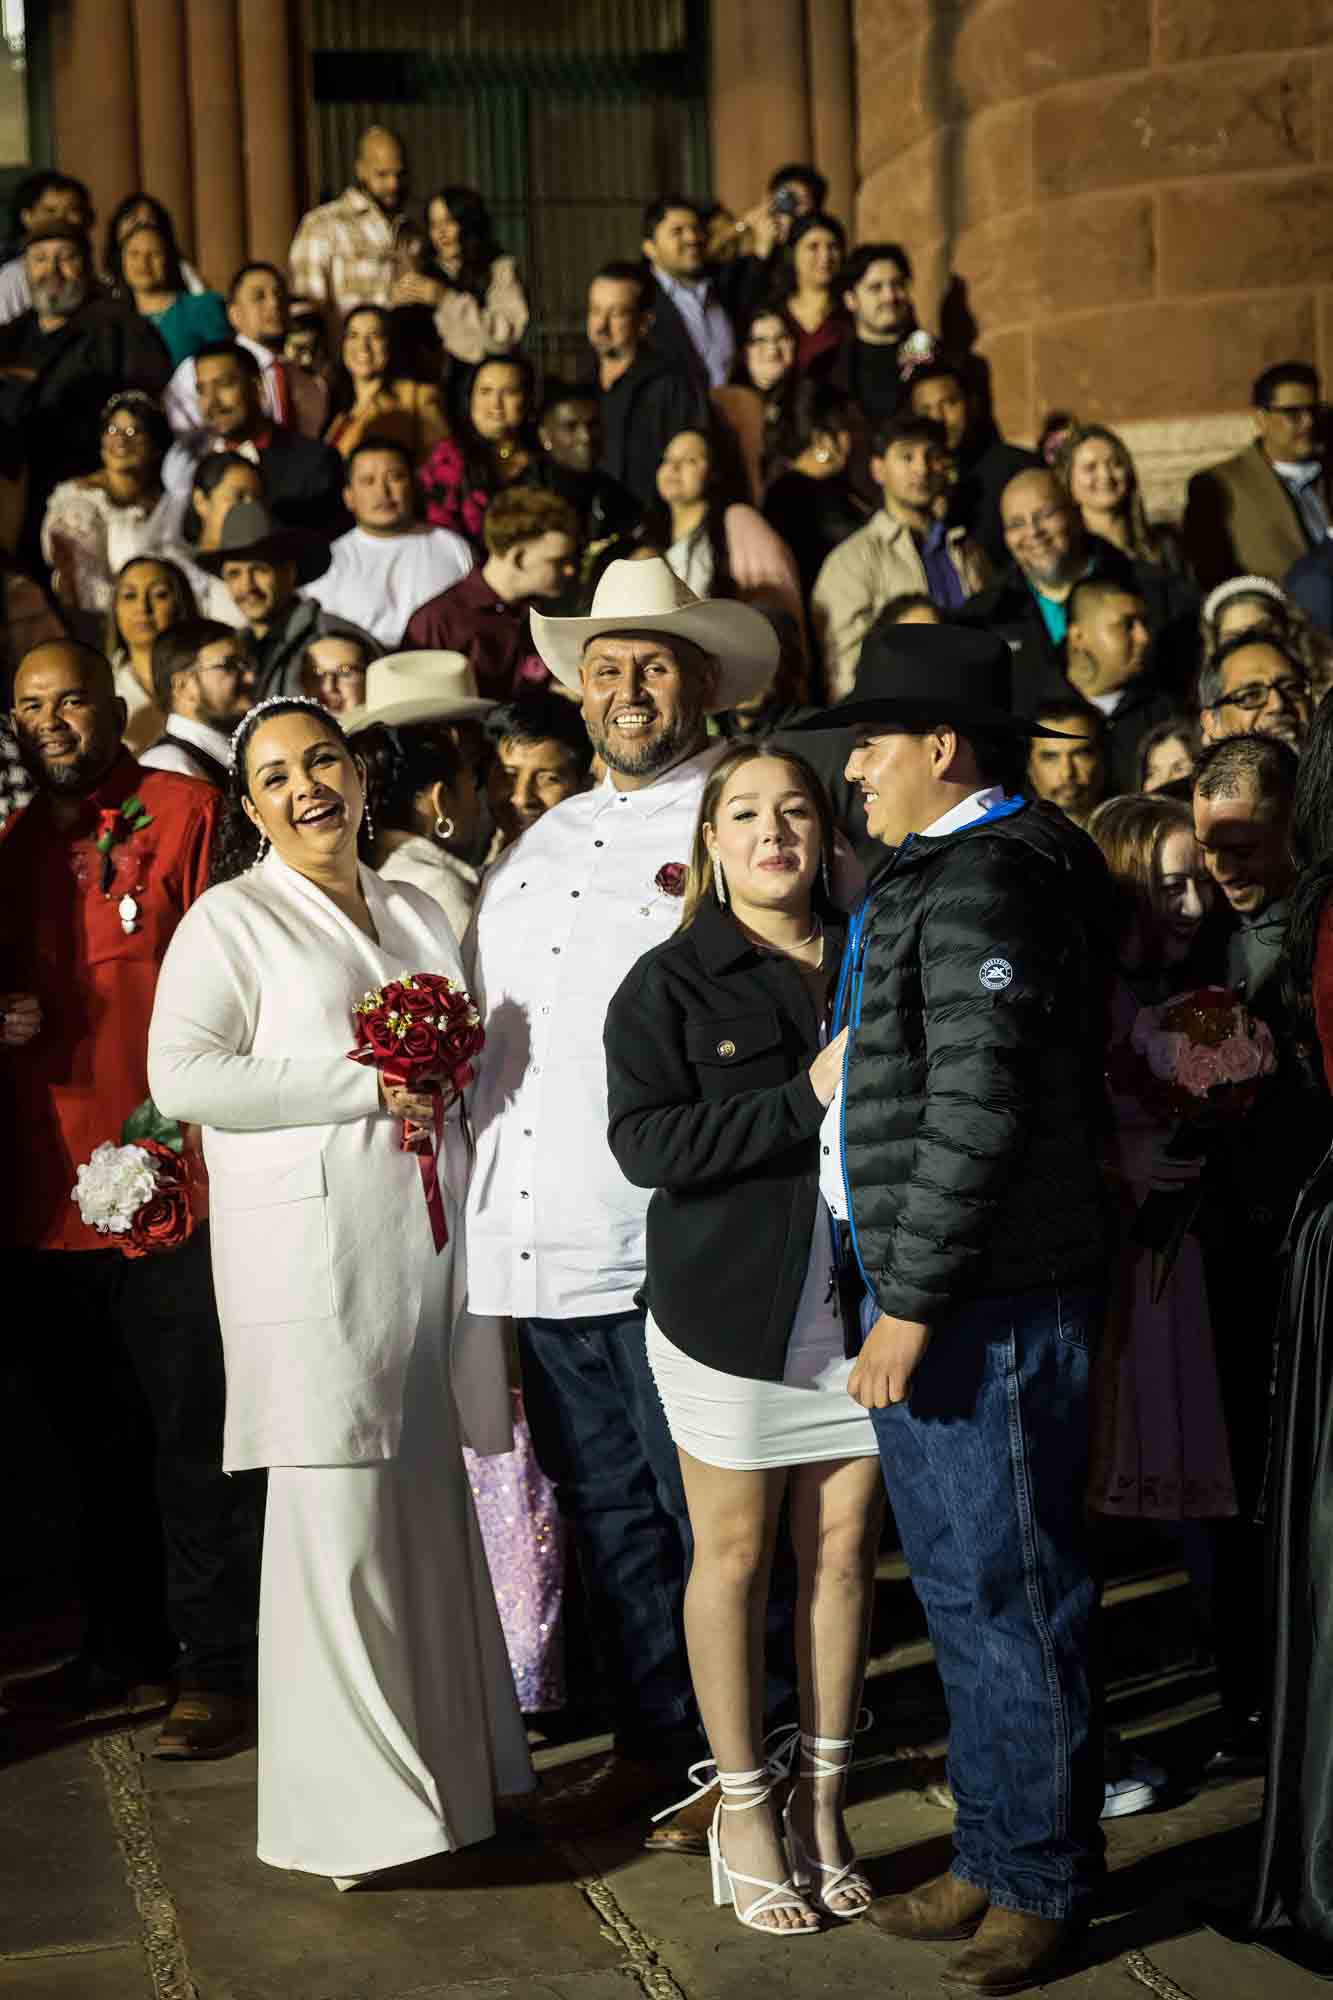 Crowd of bride and grooms standing in front of courthouse steps at night for an article on the Bexar county mass wedding event